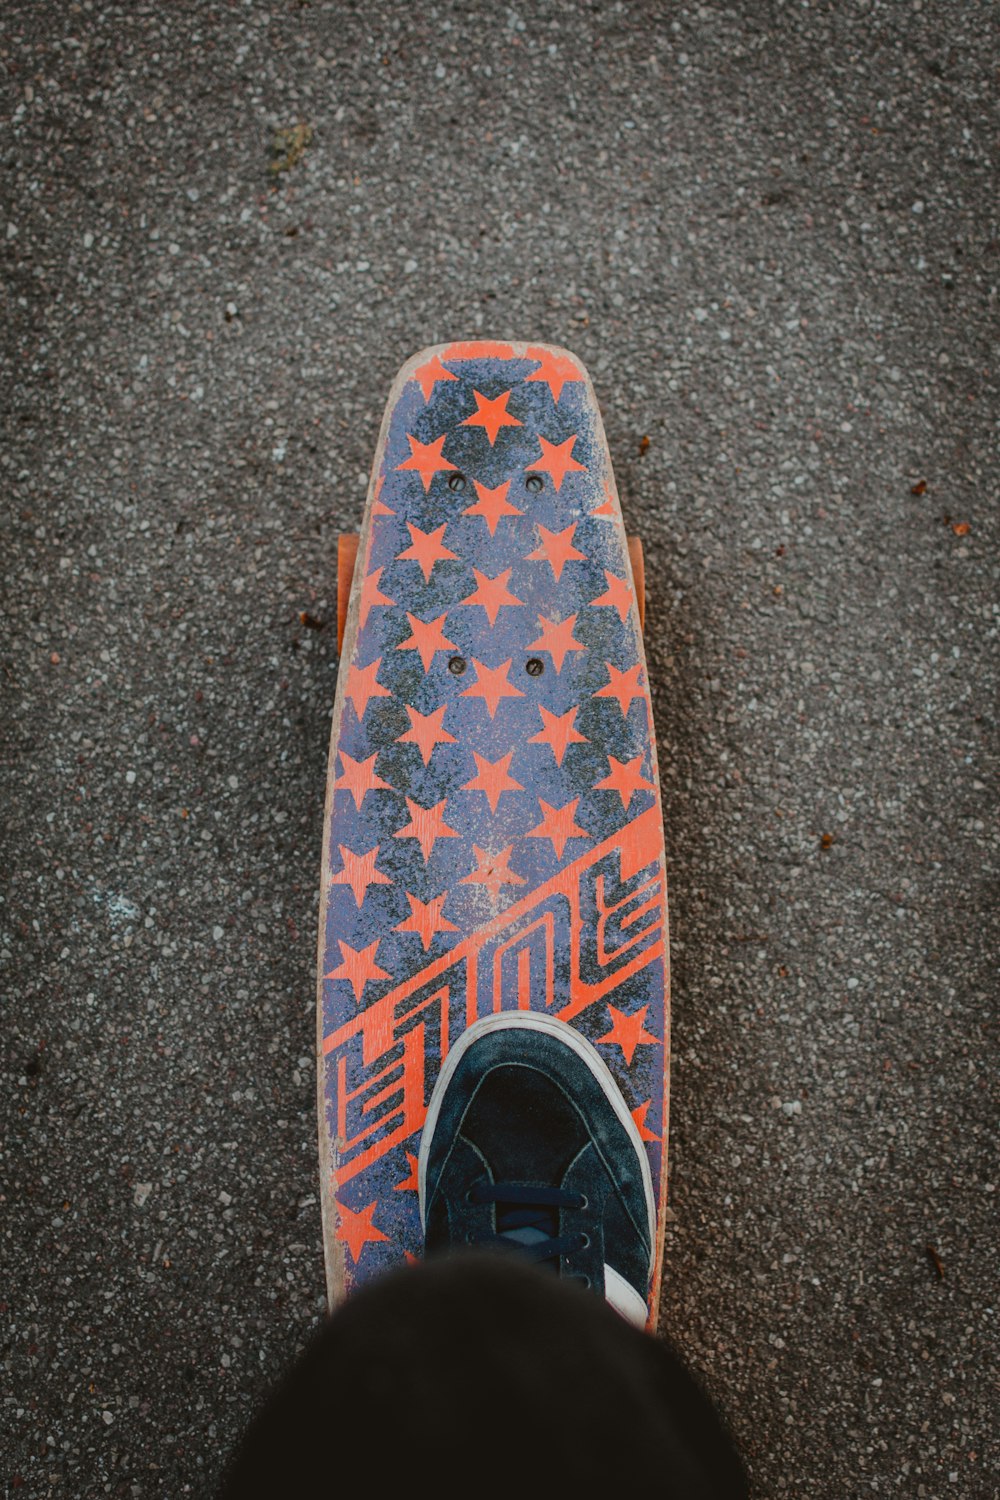 person stepping in a orange skate board close-up photography